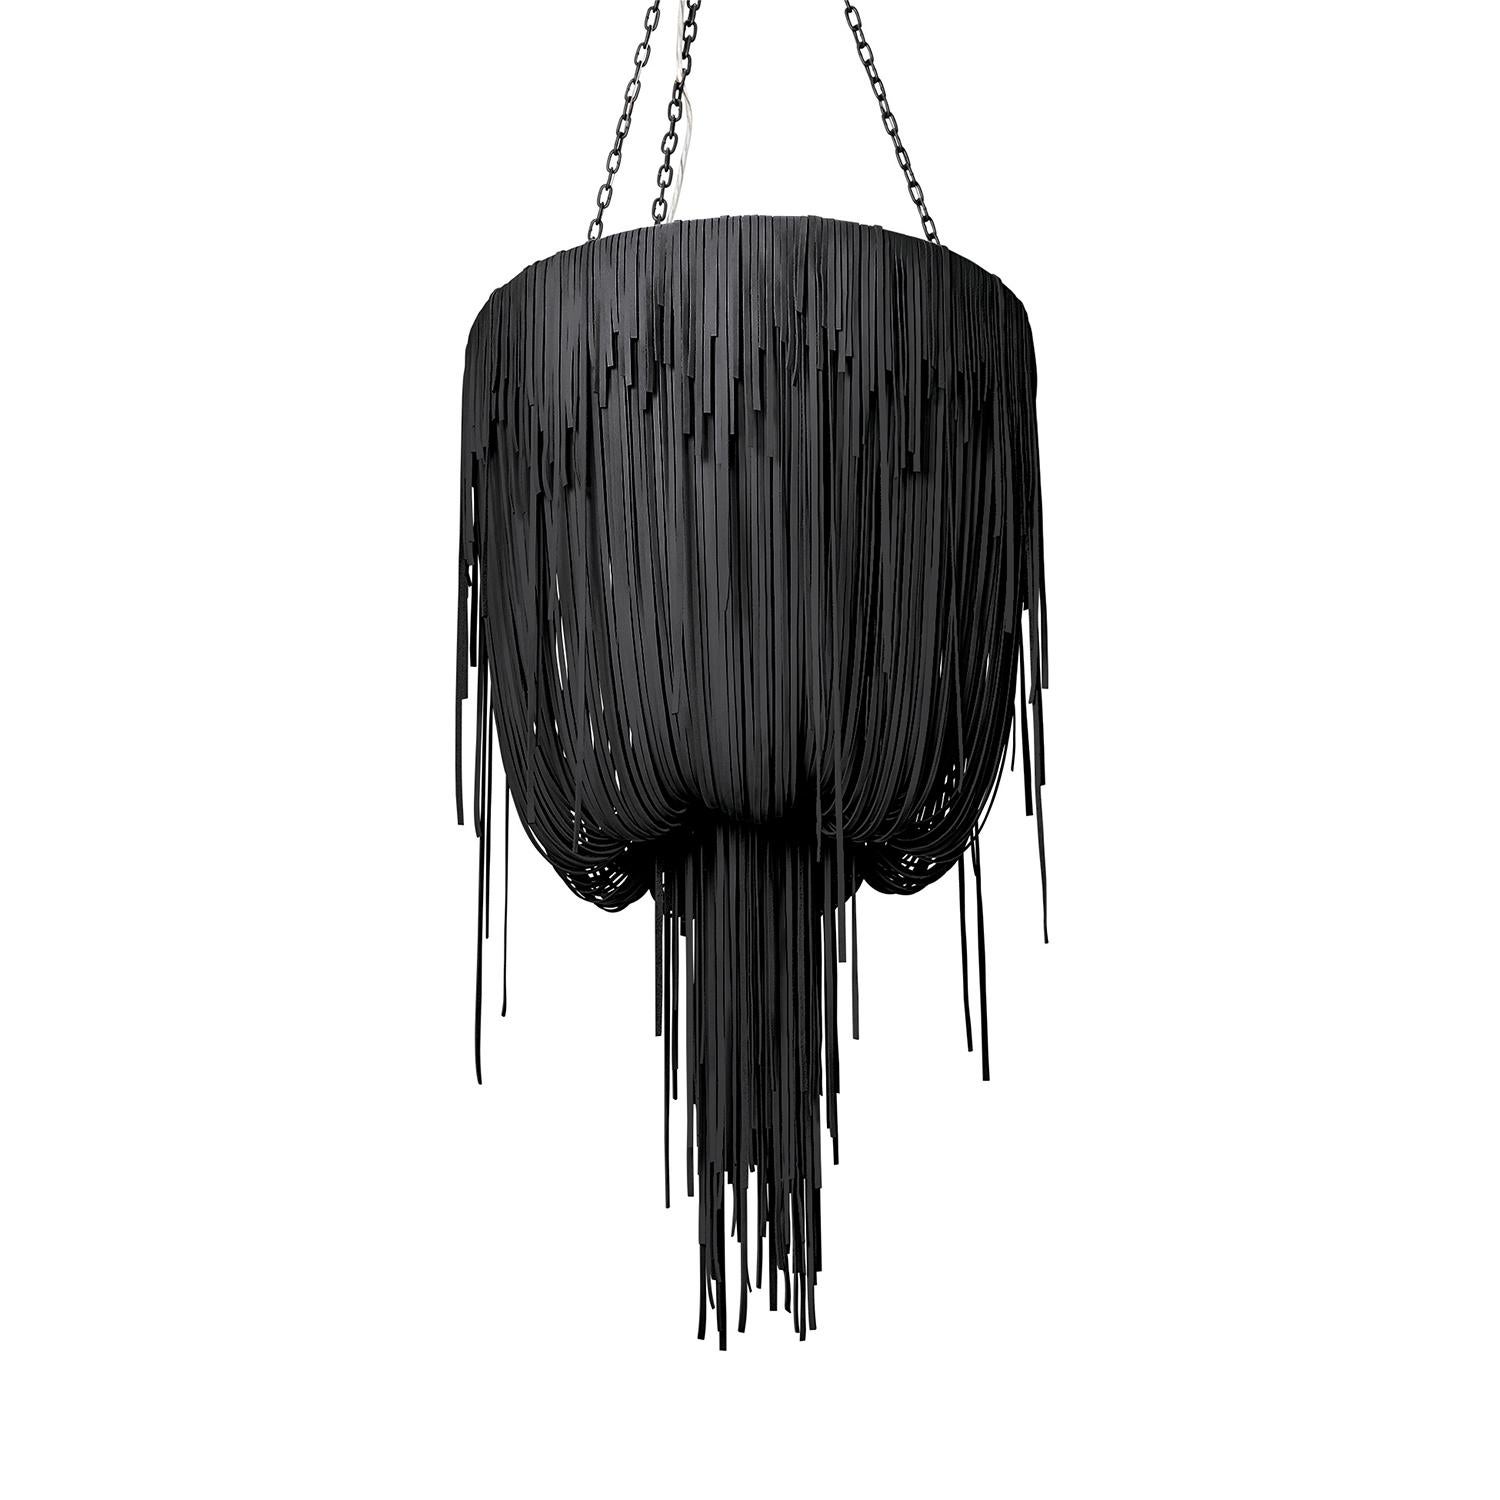 Subtly resembling a jellyfish, the Urchin Chandelier is handcrafted with varying lengths of stripped leather, creating delicate layers of movement and texture. The leather is draped by hand to give it a more feminine, organic feel. 

All